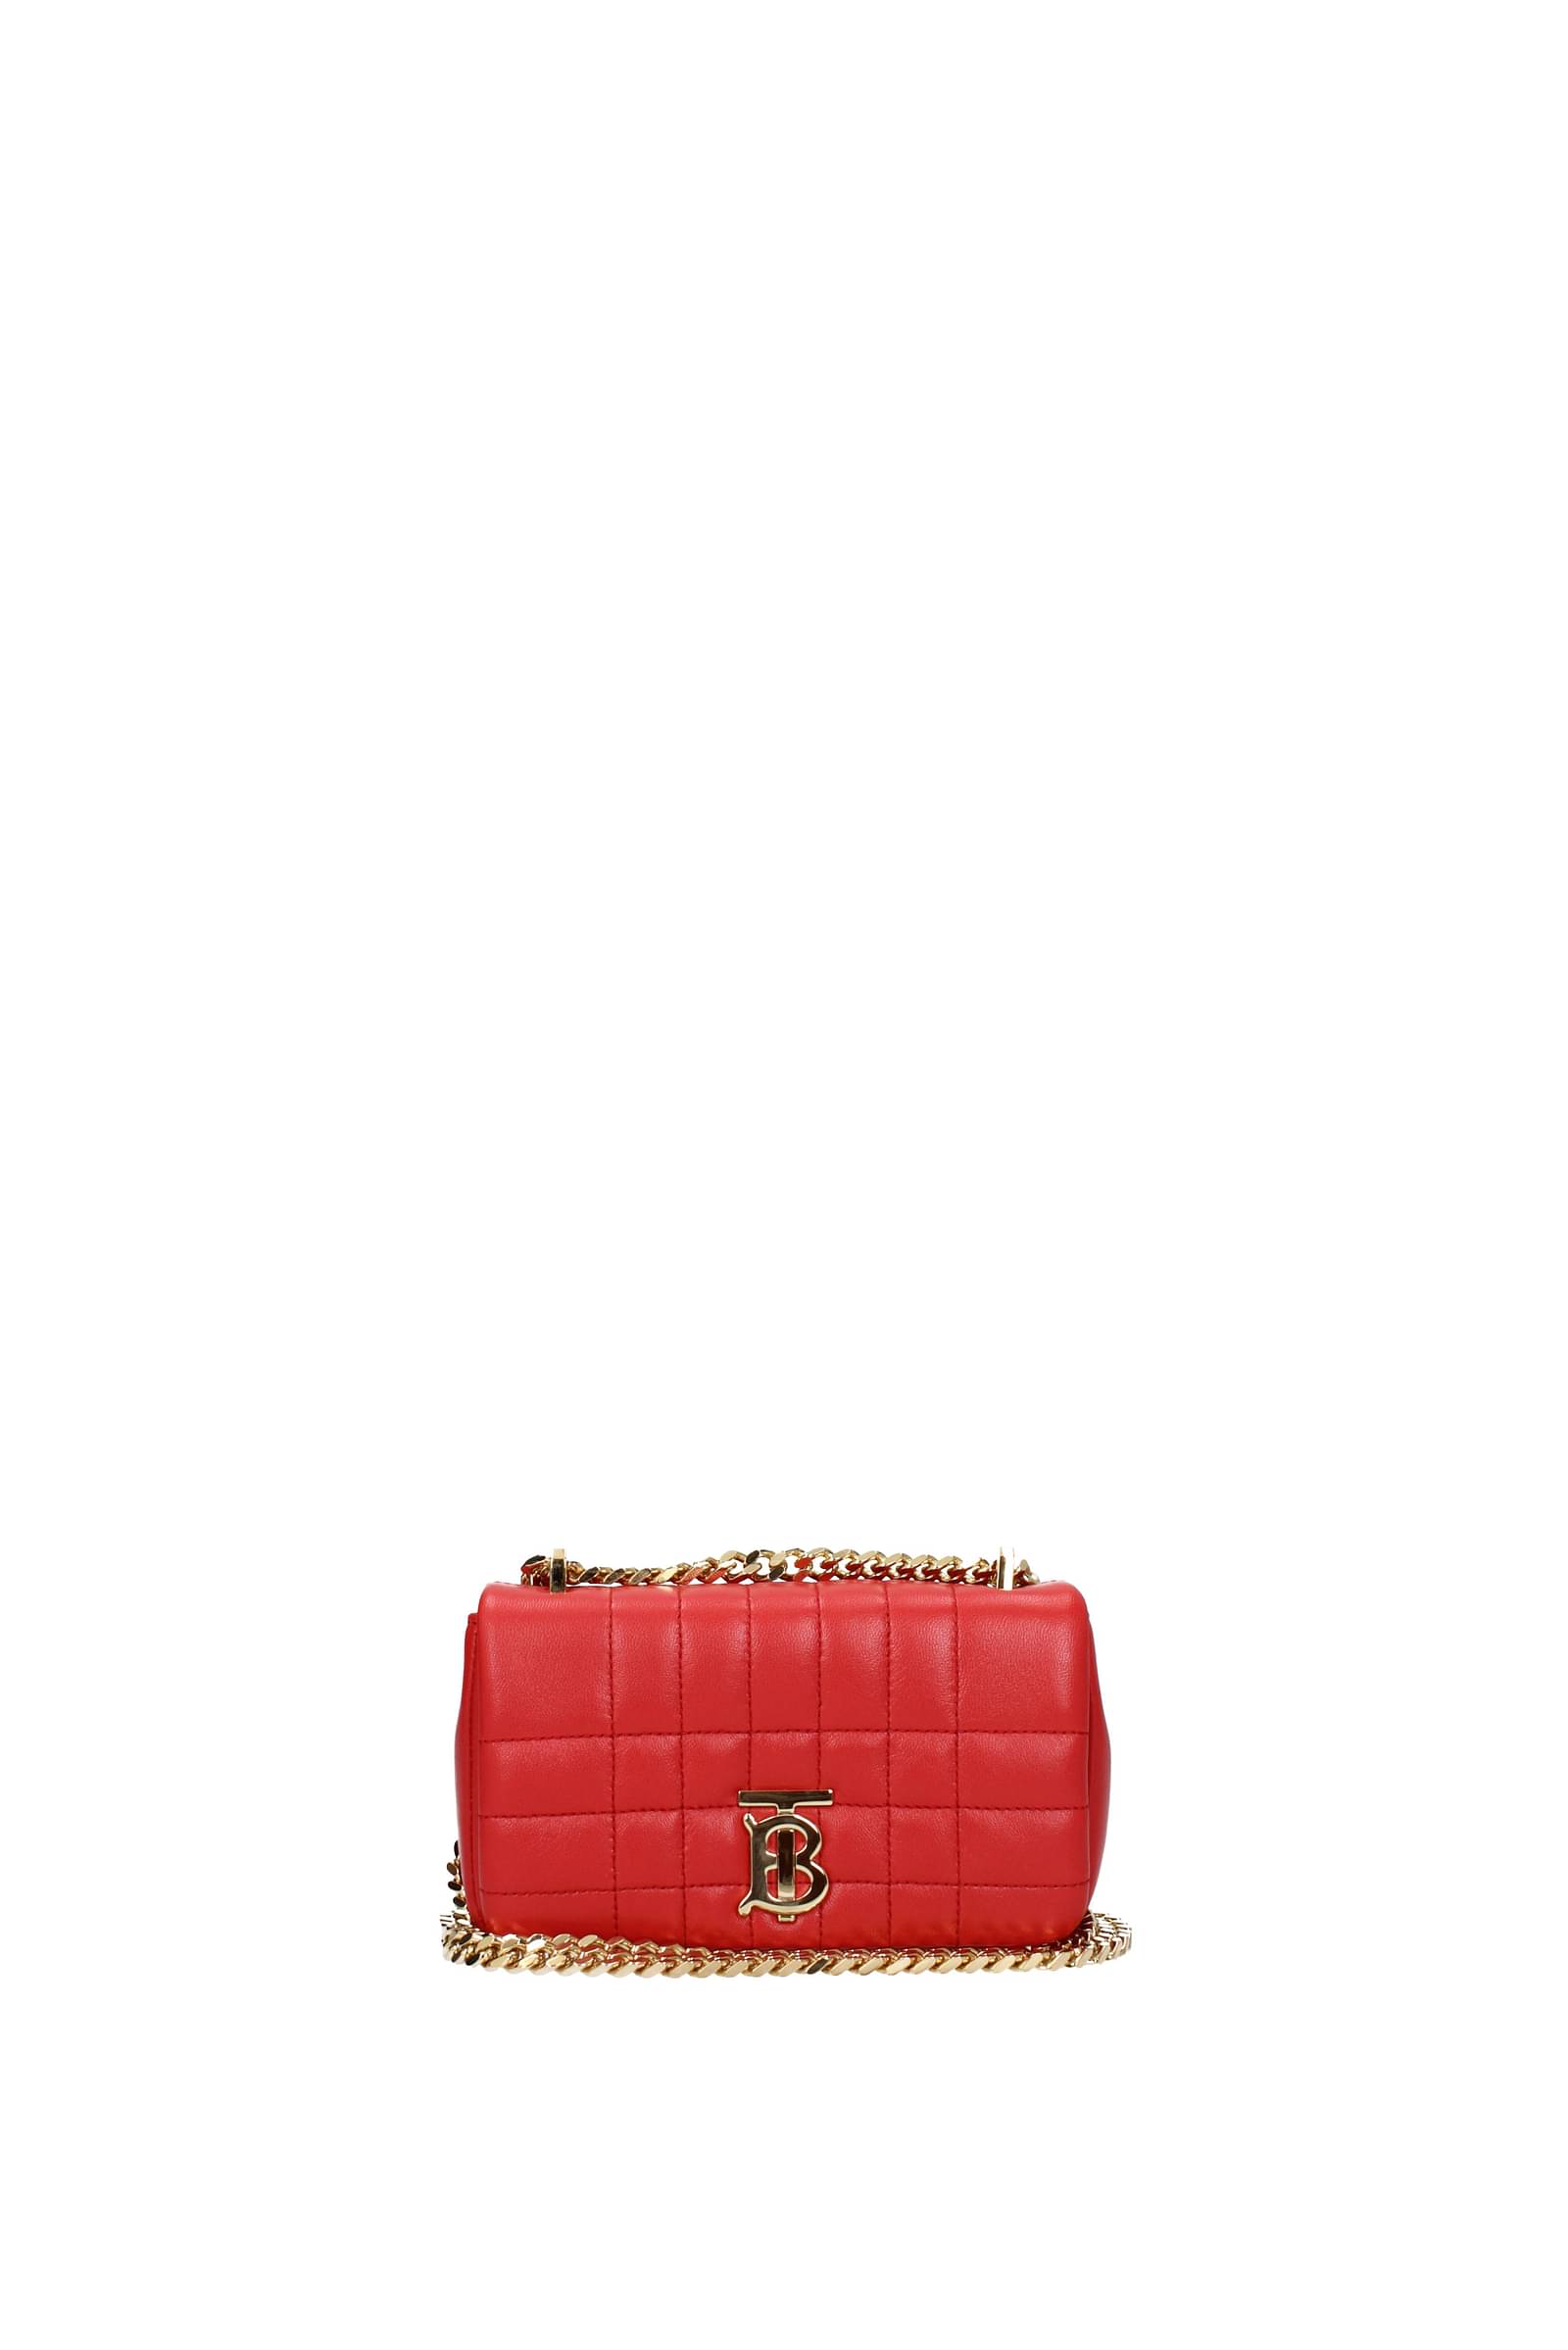 Burberry Crossbody Bag lola Women 8060067 Leather Red Bright Red 1032€